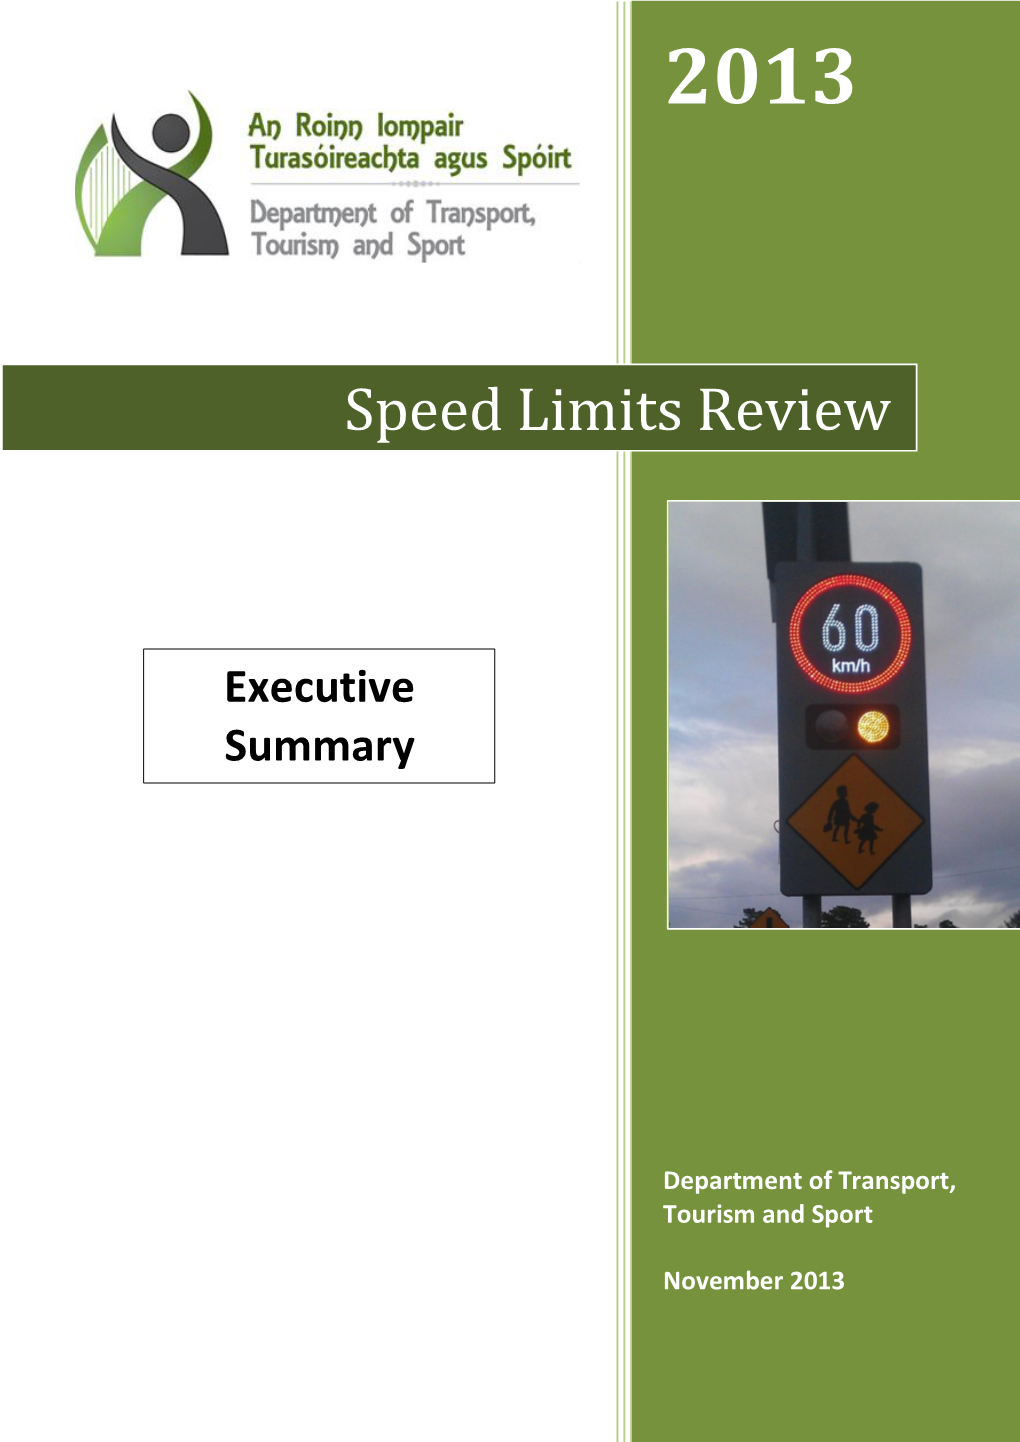 Speed Limits Review